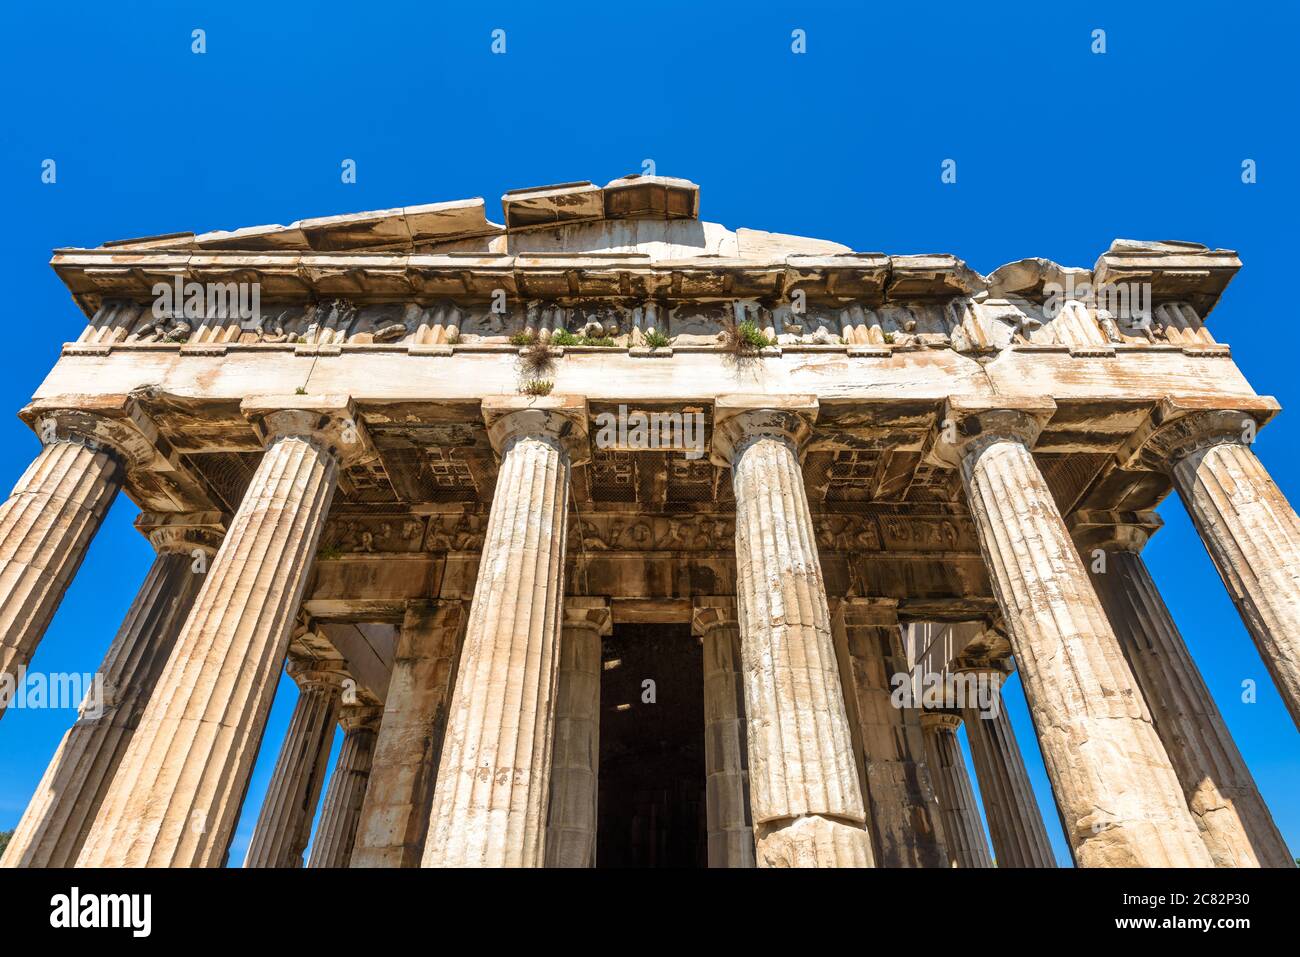 Temple of Hephaestus in Ancient Agora, Athens, Greece. It is famous landmarks of Athens. Front view of classical Greek temple on sky background, monum Stock Photo